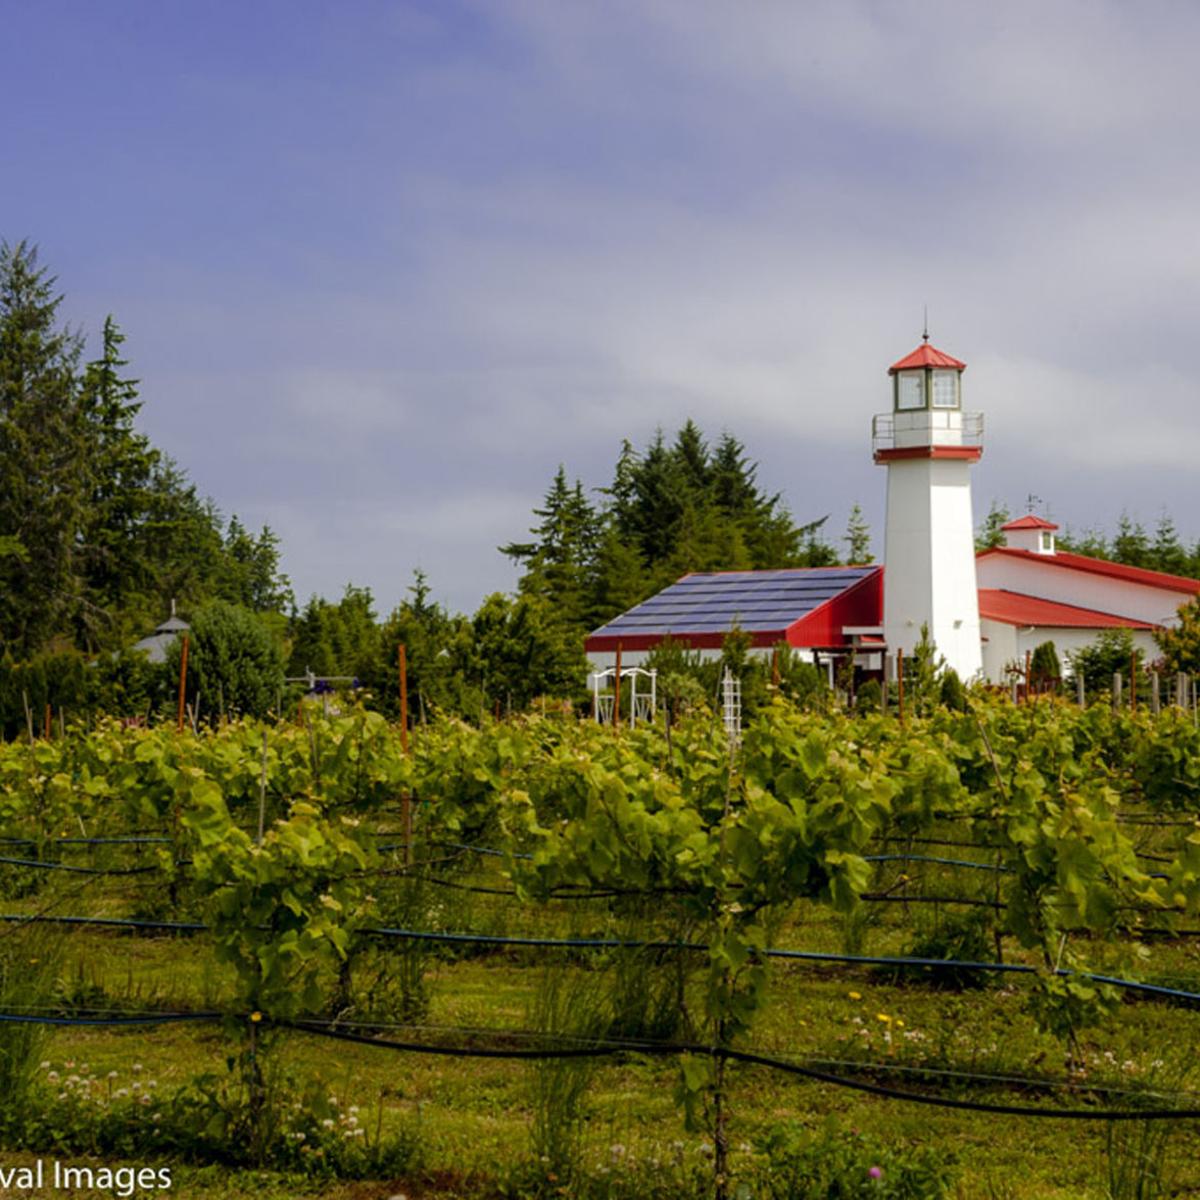 Andy Perdue reveals his 25 top Northwest wines for 2019